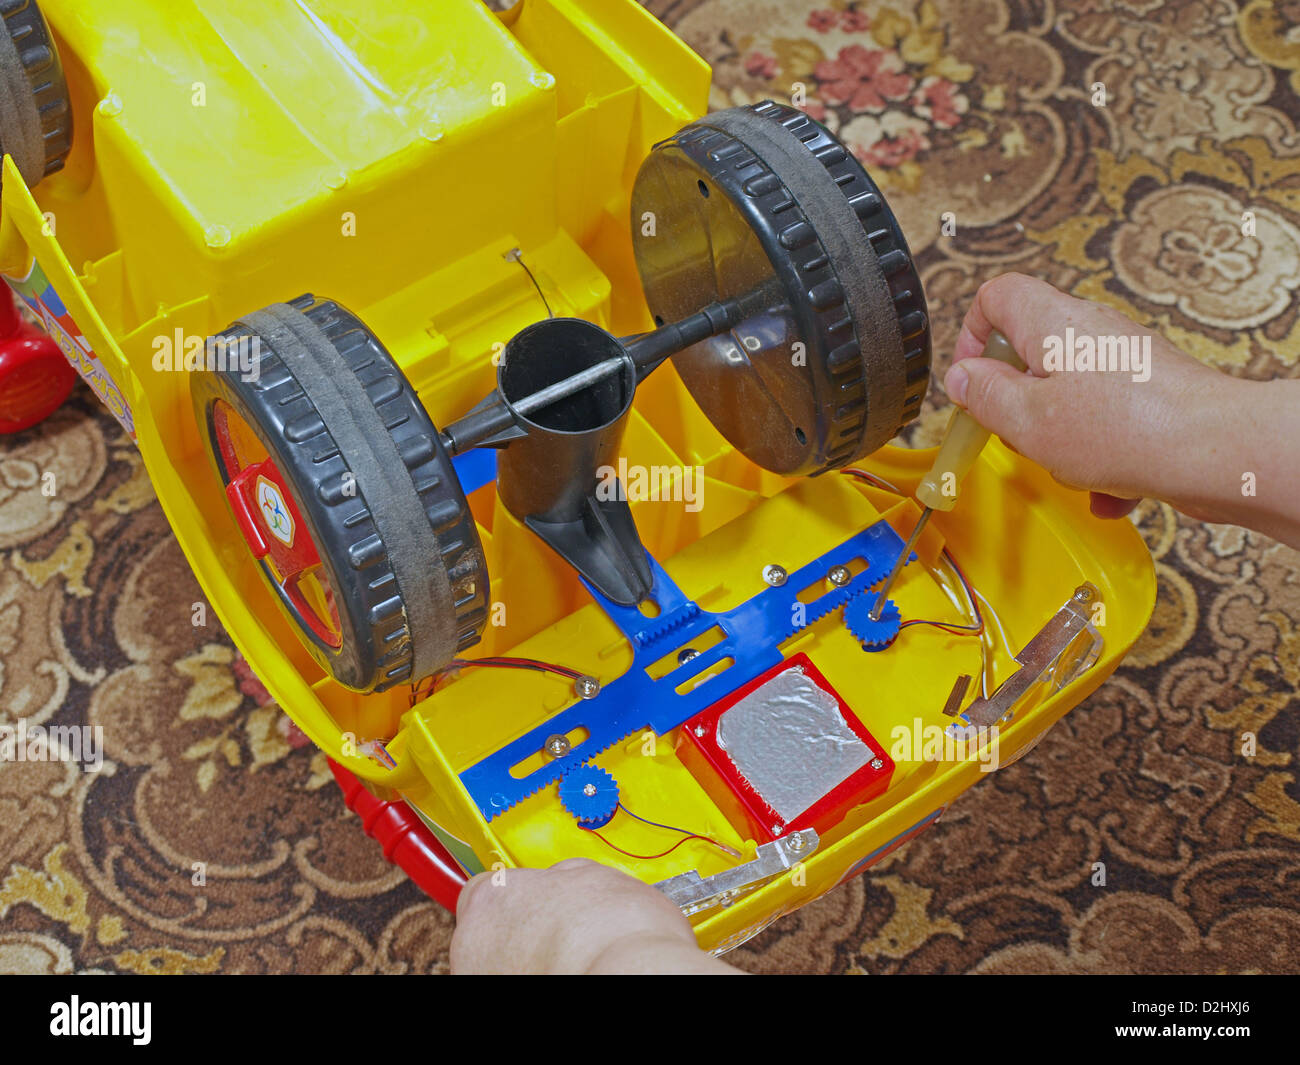 Repairing plastic toy car with screwdriver, close up Stock Photo